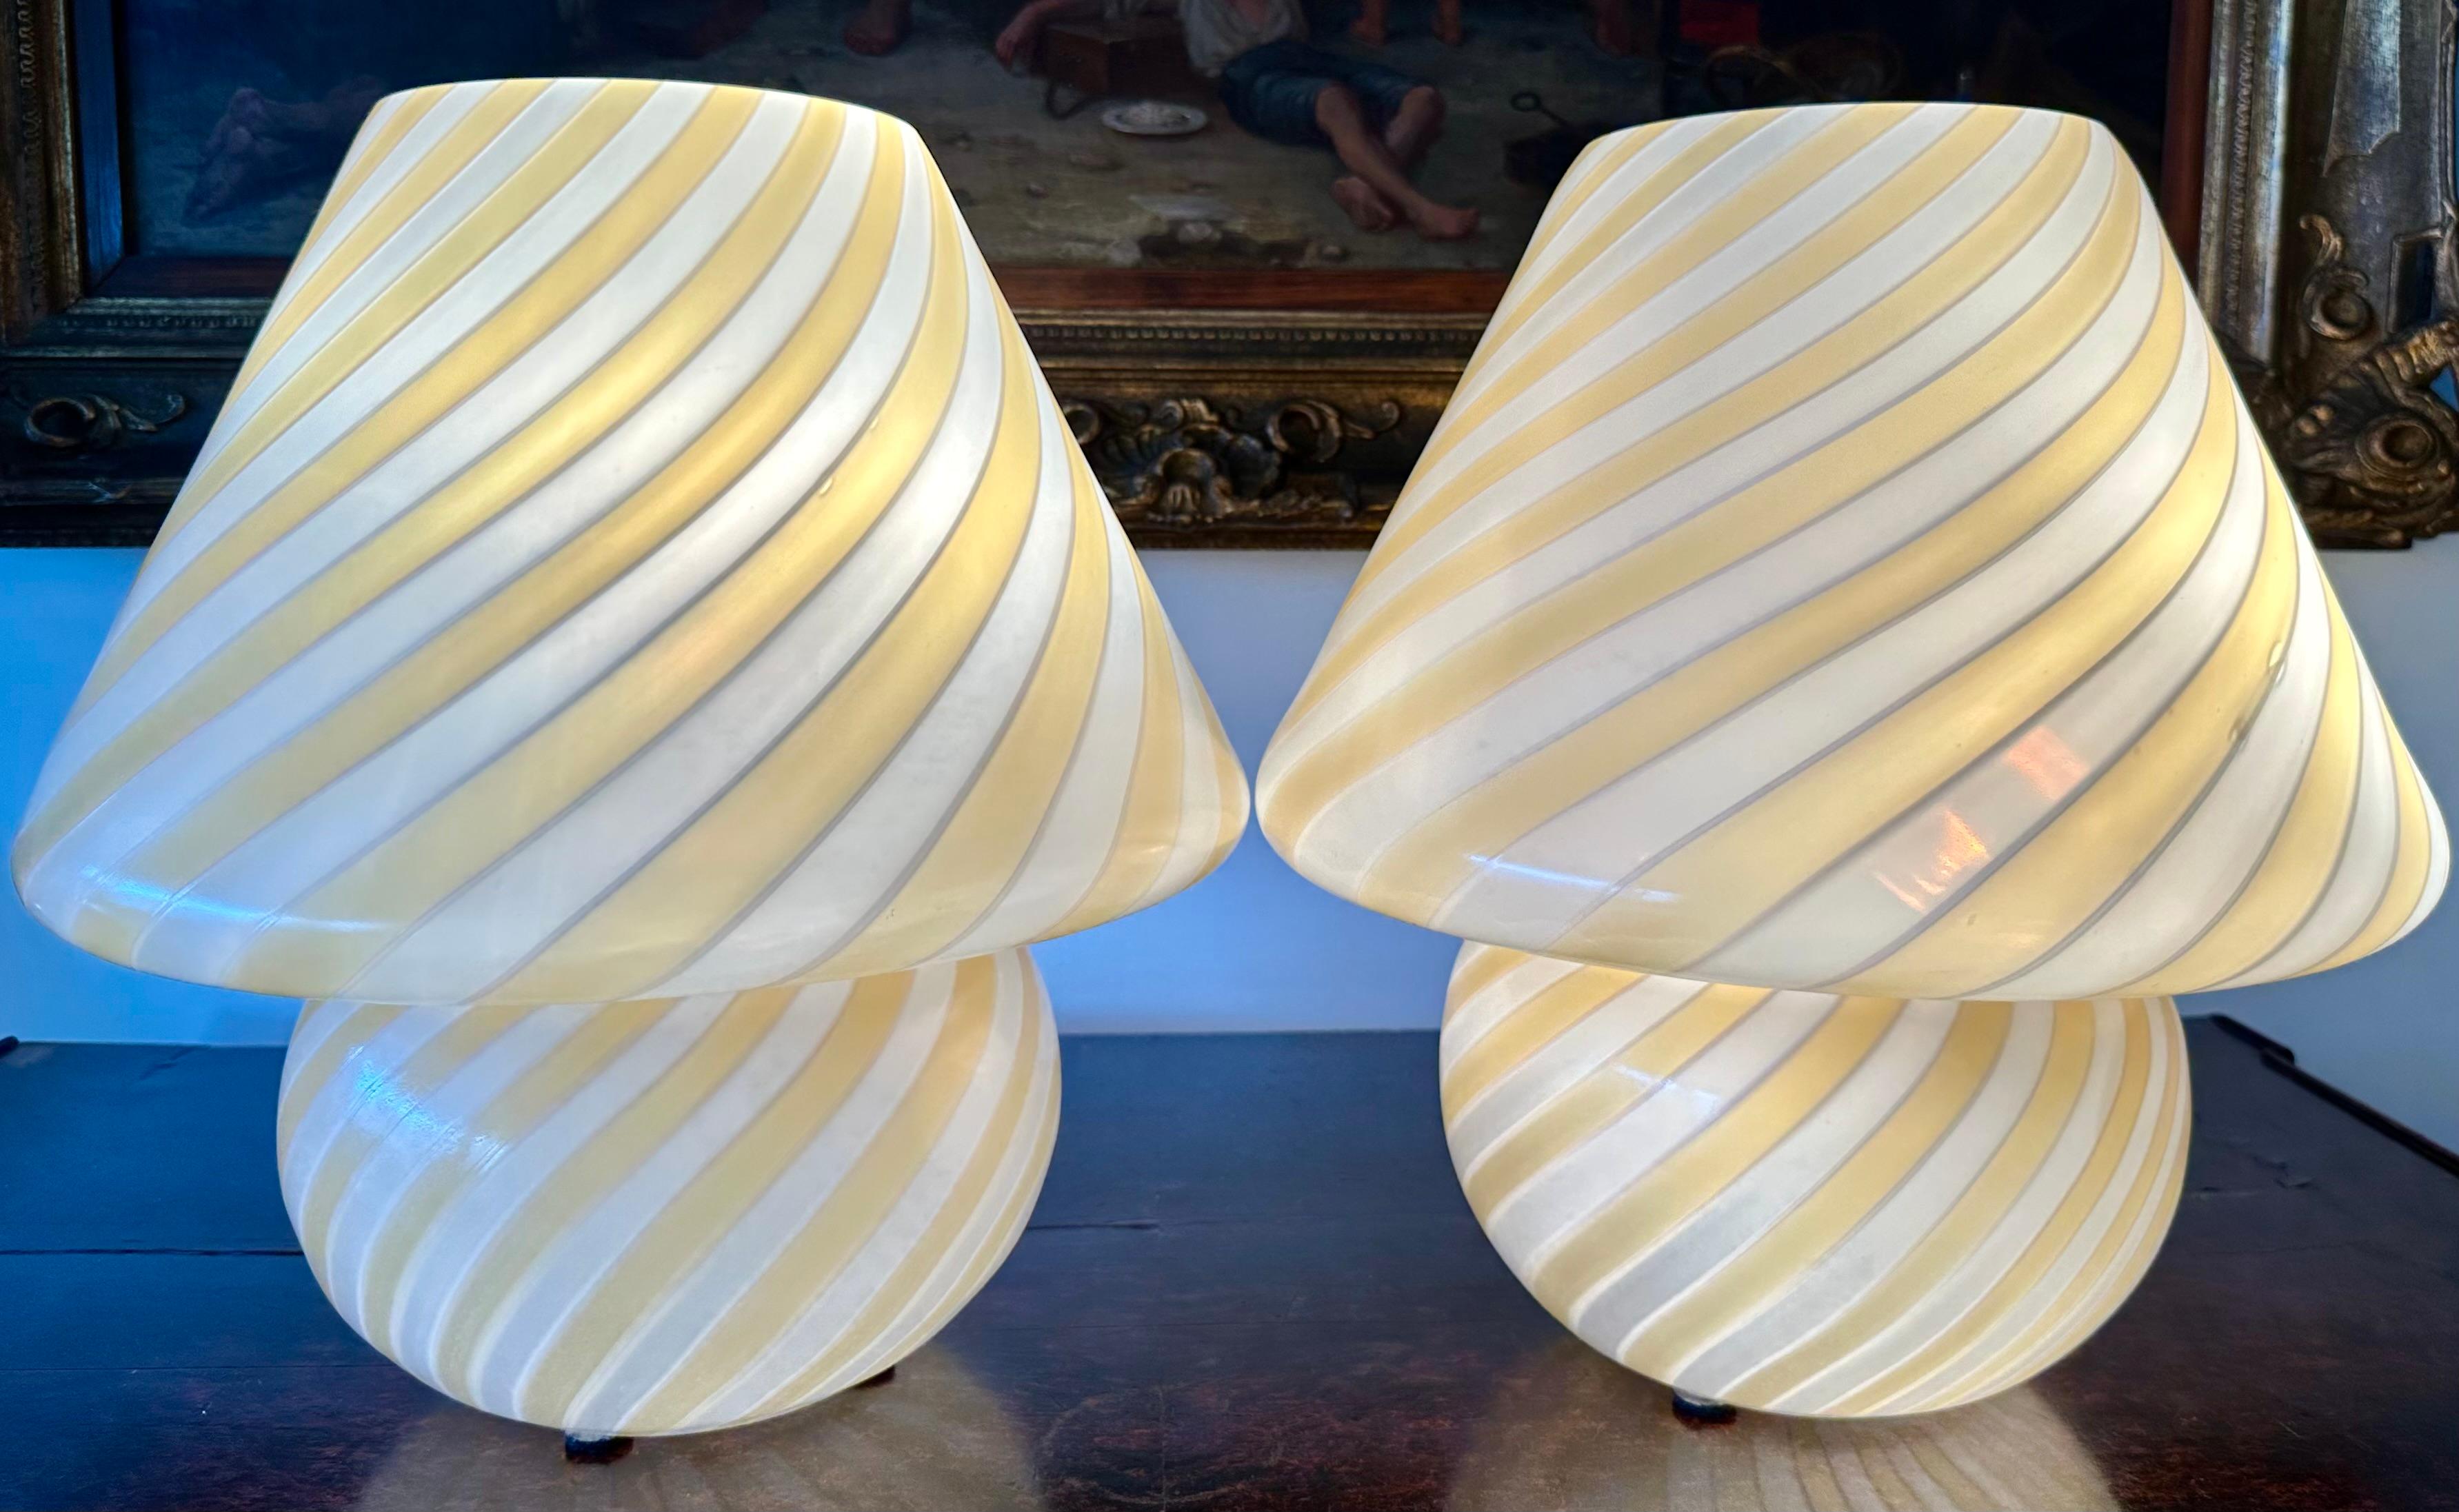 Pair of murano glass mushroom table lamps, Italy, circa 1970.

The elegant shape of the murano post modernism with a swirl yellow and white lines makes this pair of murano table lamps a typical example of the 1970s glass blowing art. These lamps